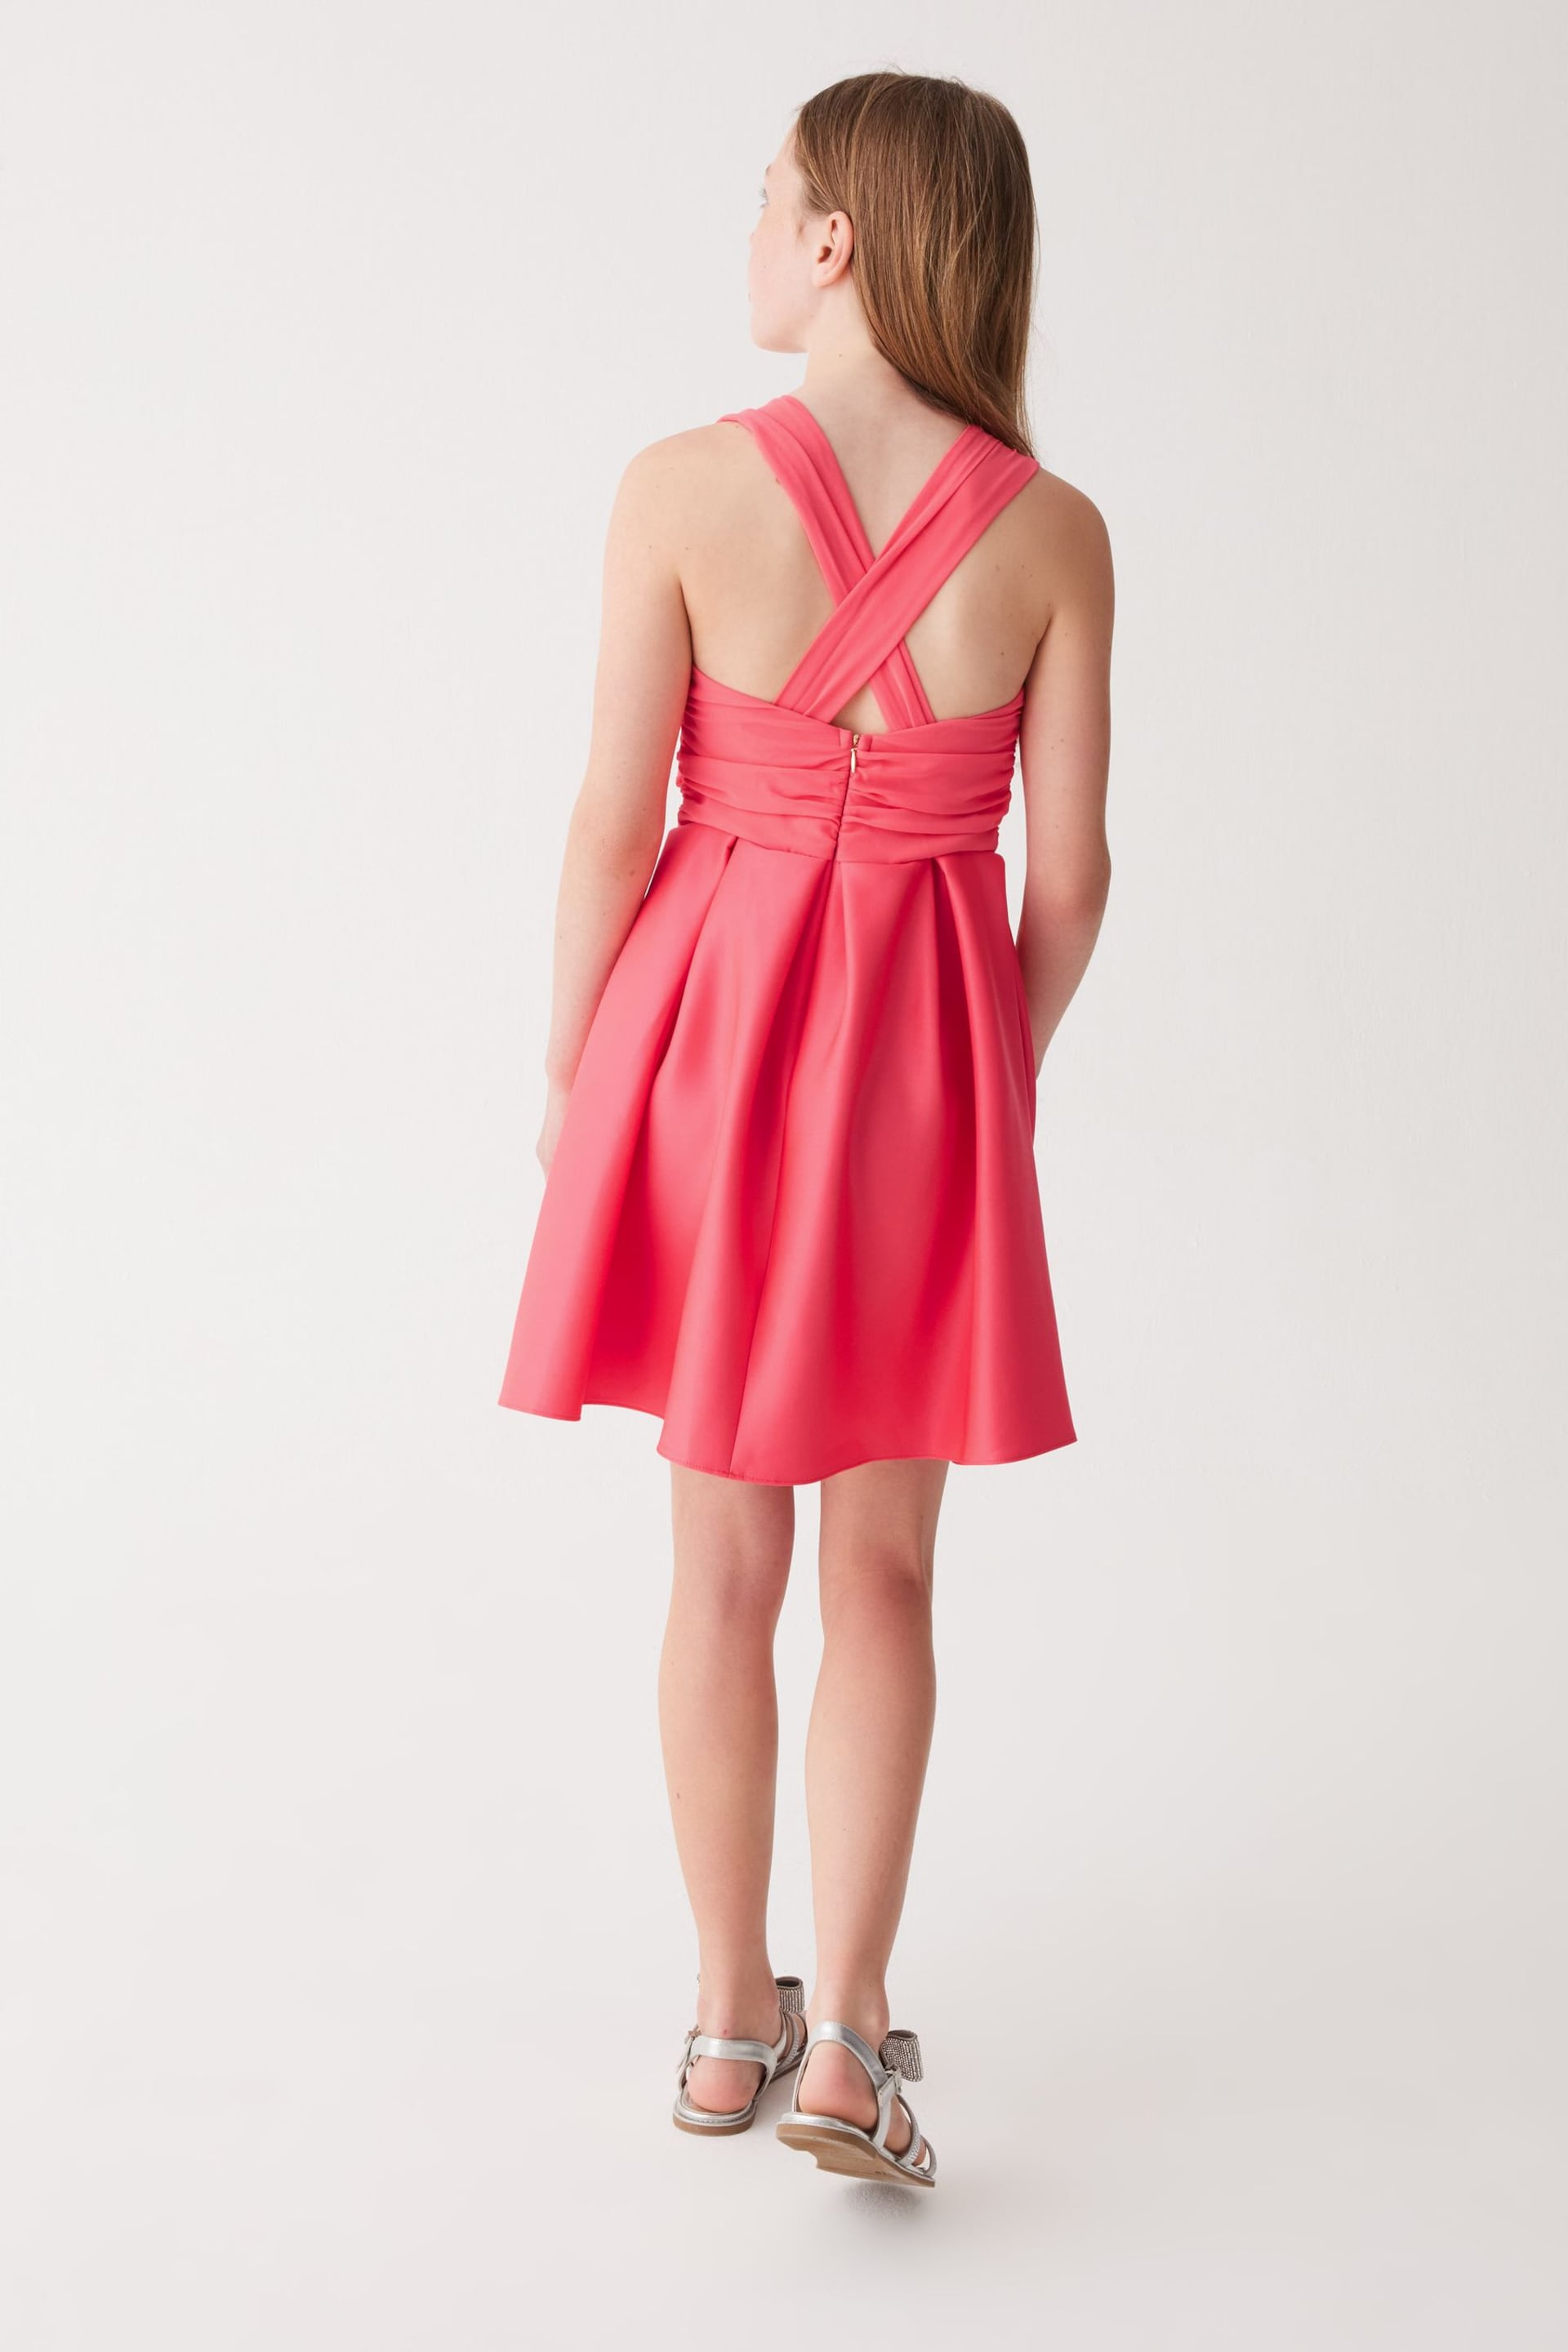 Baker by Ted Baker Coral Pink Chiffon Scuba Dress - Image 3 of 5